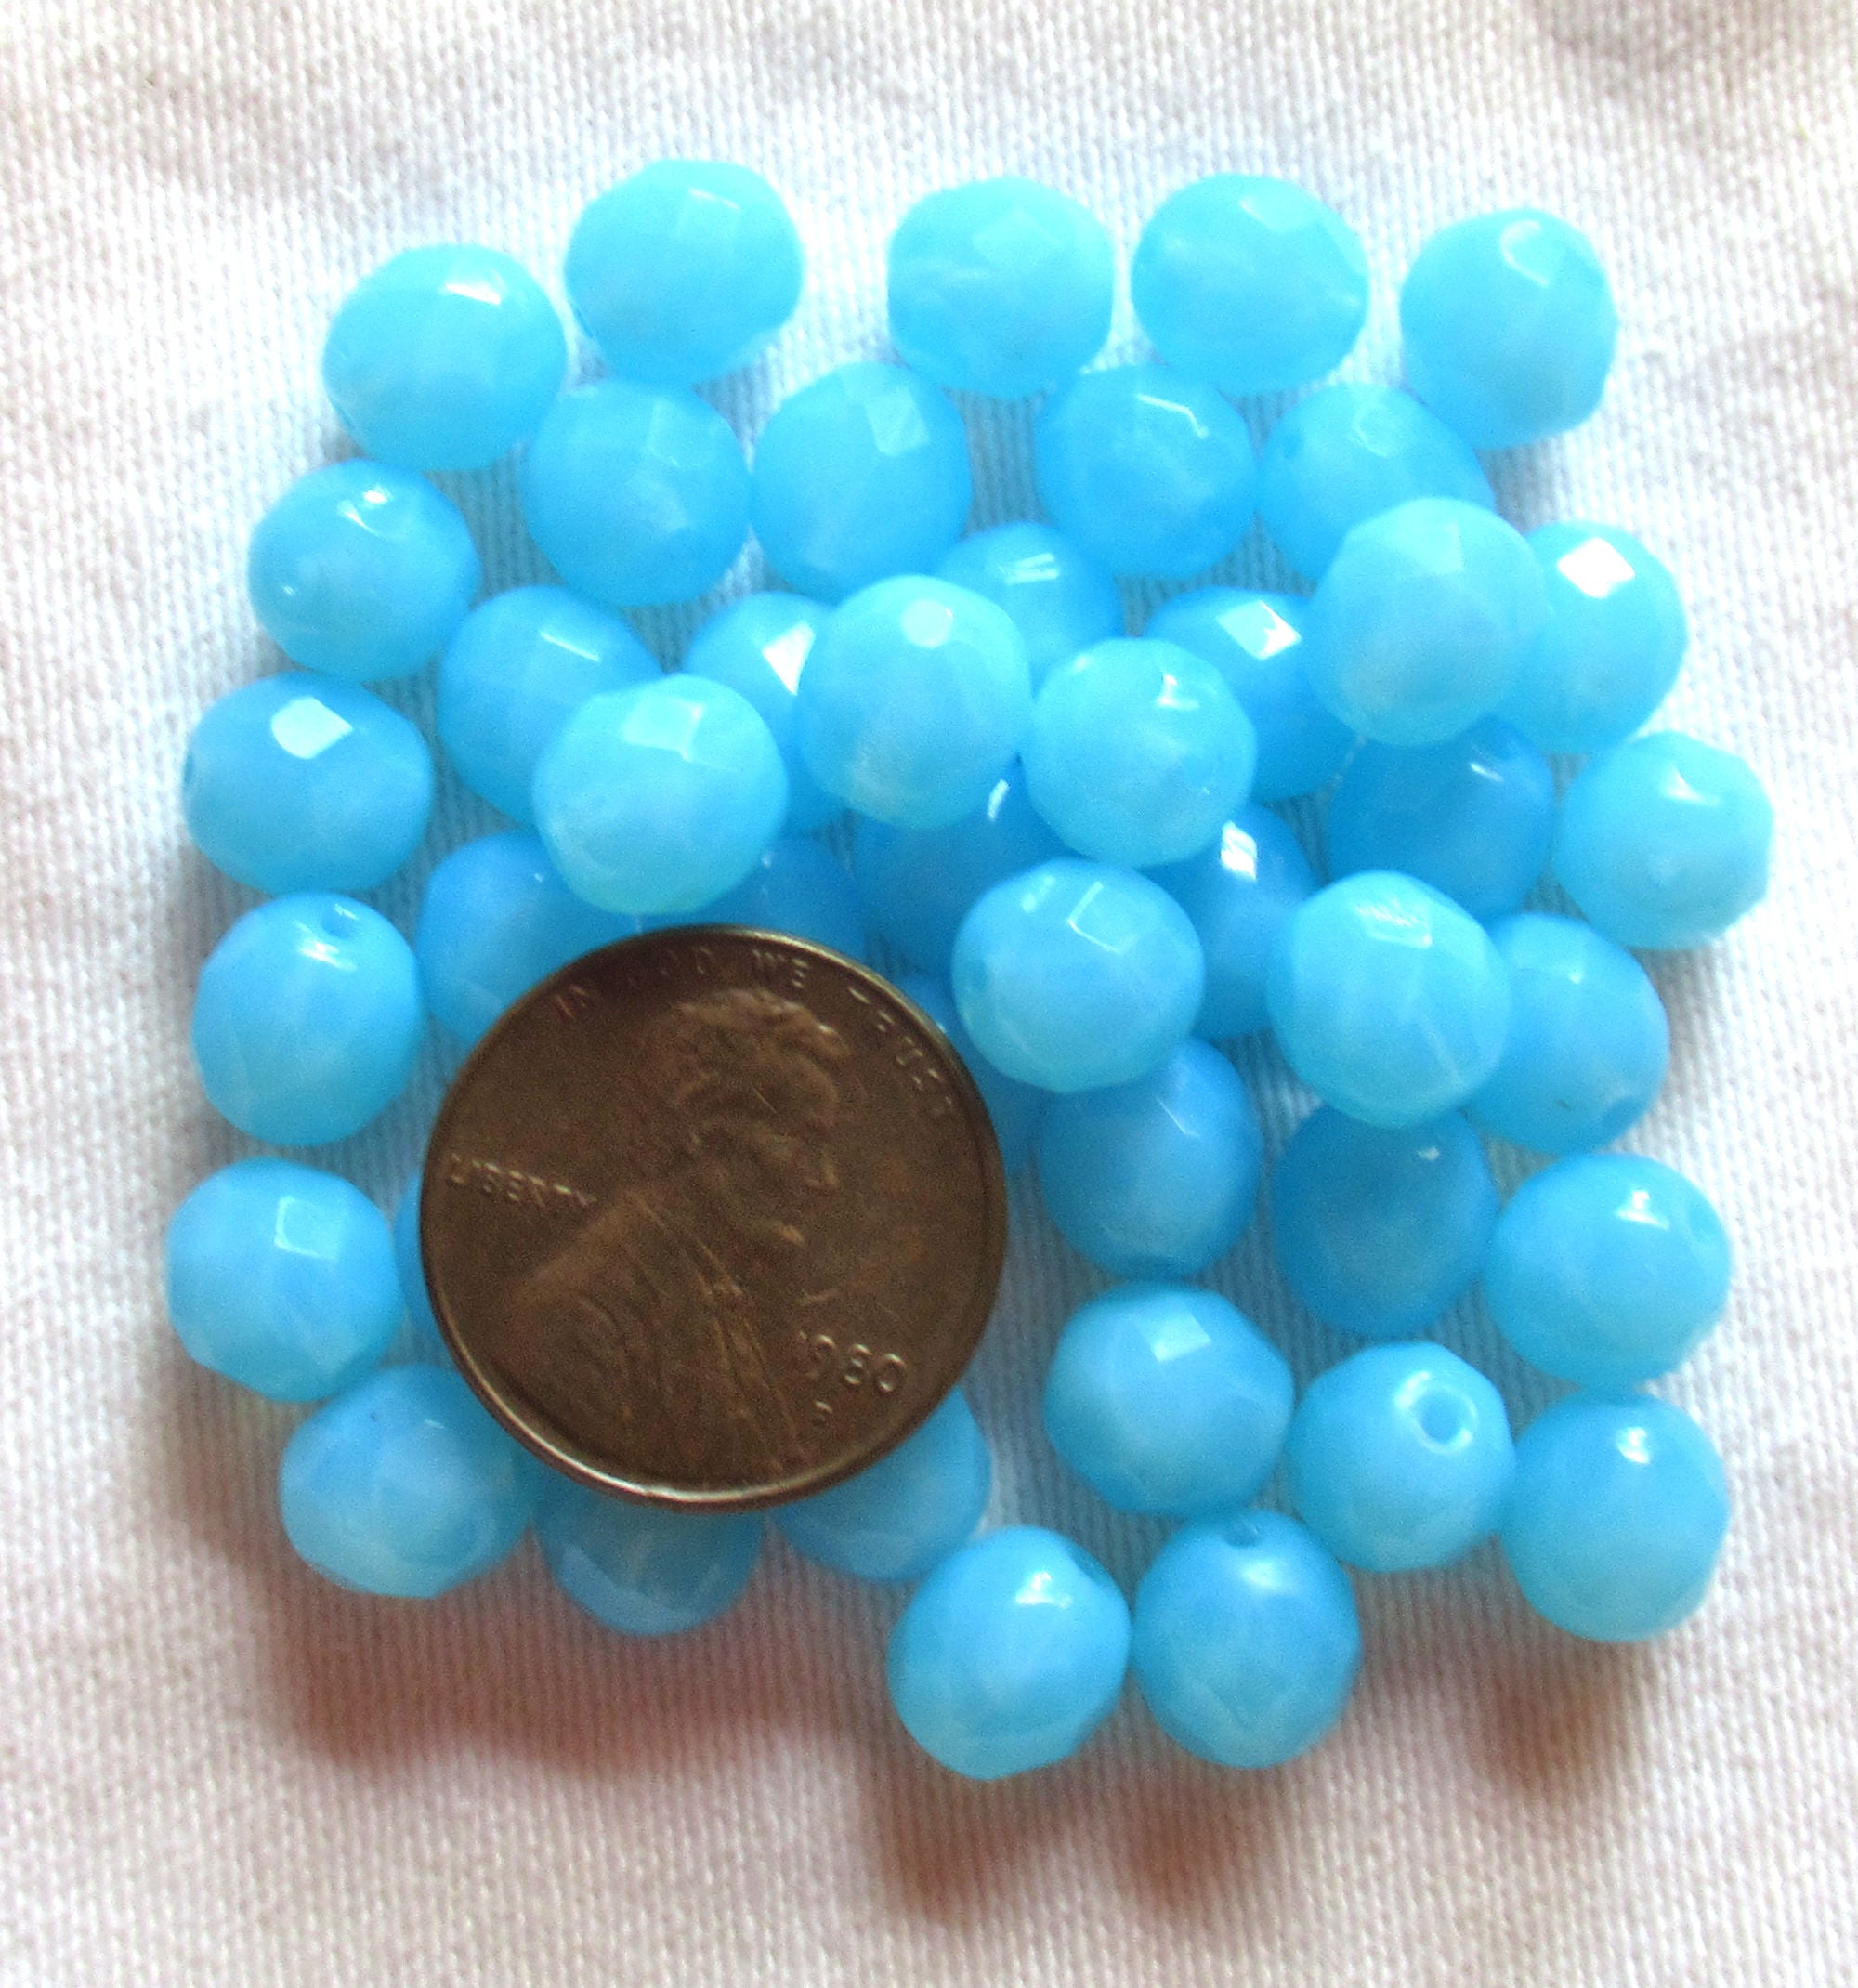 25 8mm Sky Blue Opal beads, opaque faceted round firepolished